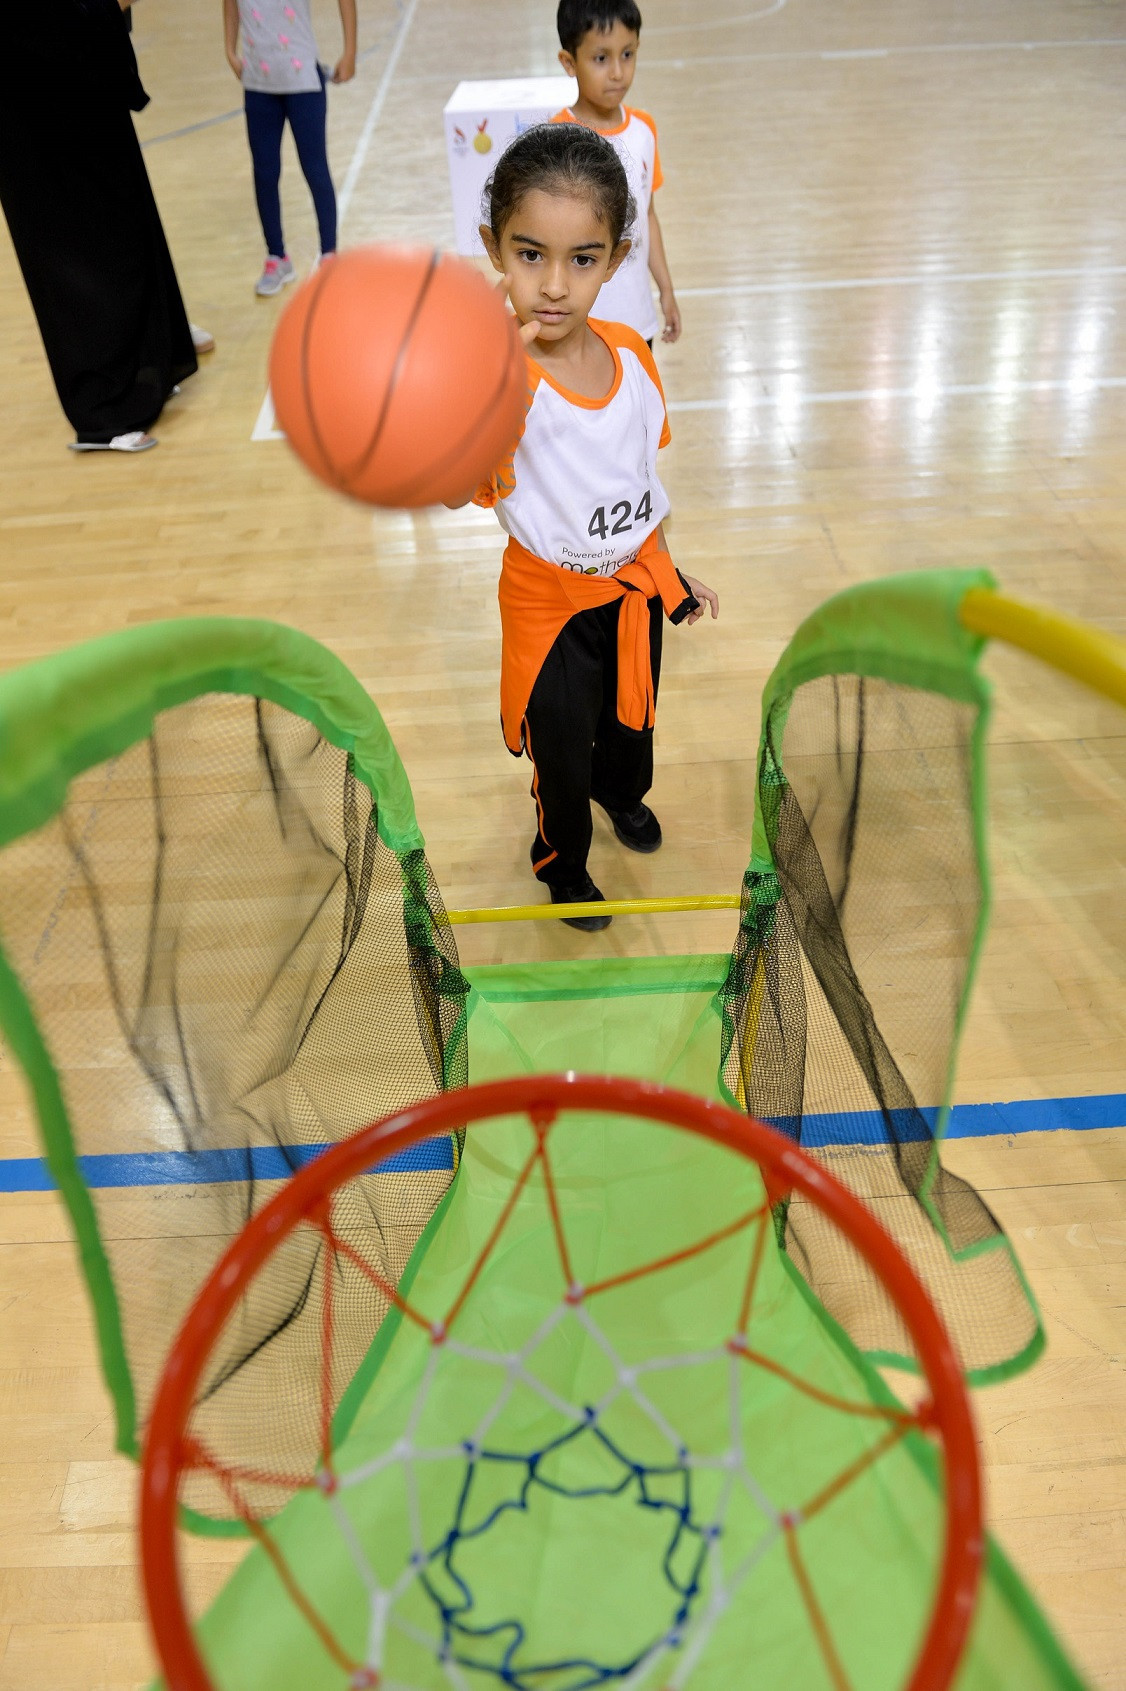 Last year's event saw children as young as two take part in sports including basketball ©BOC